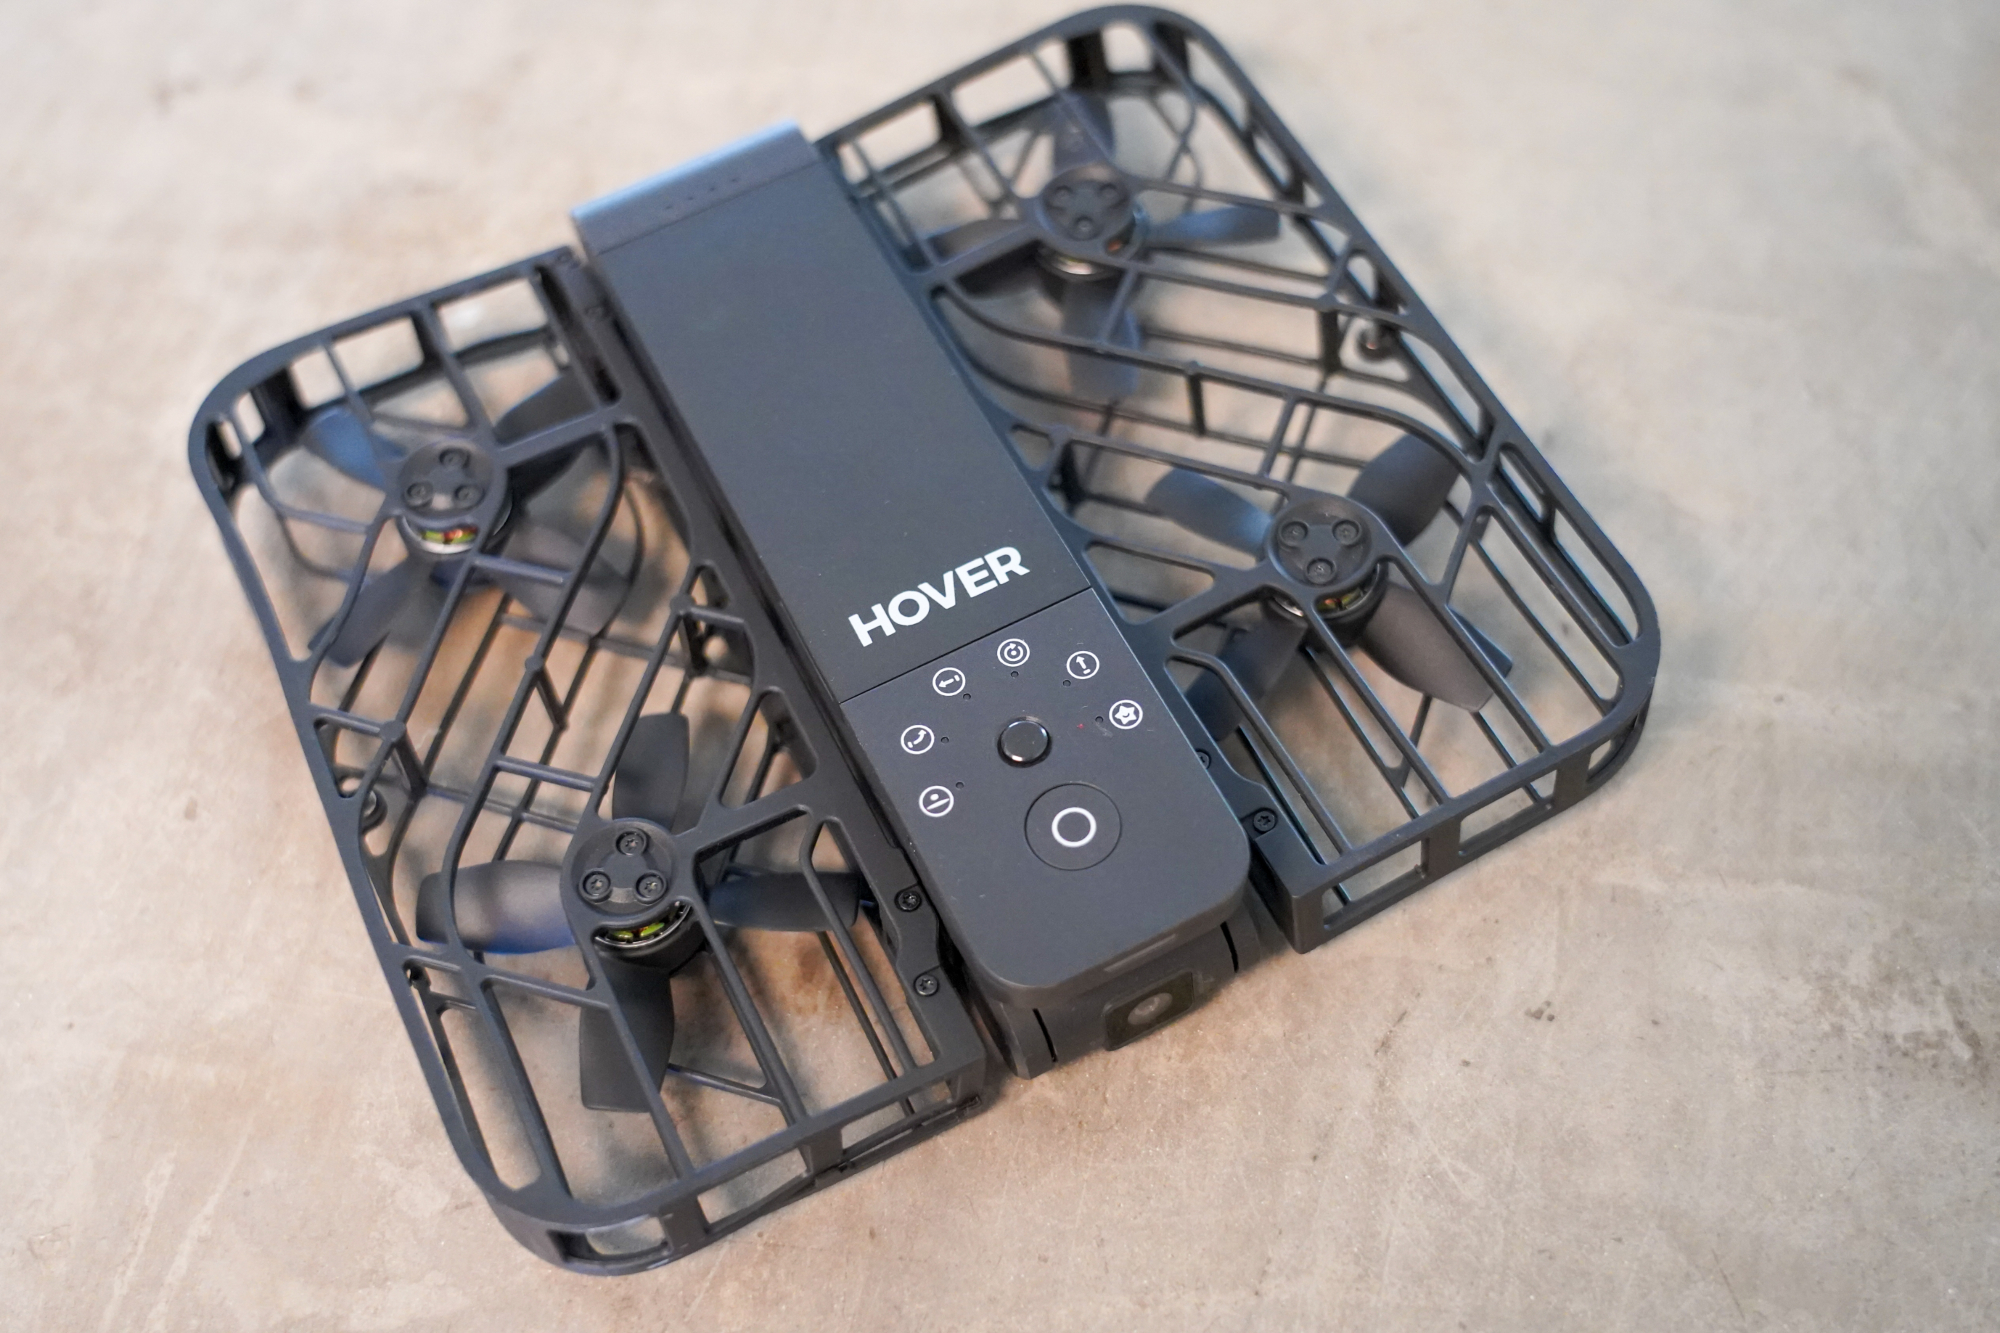 The HoverAir X1 self-flying video drone